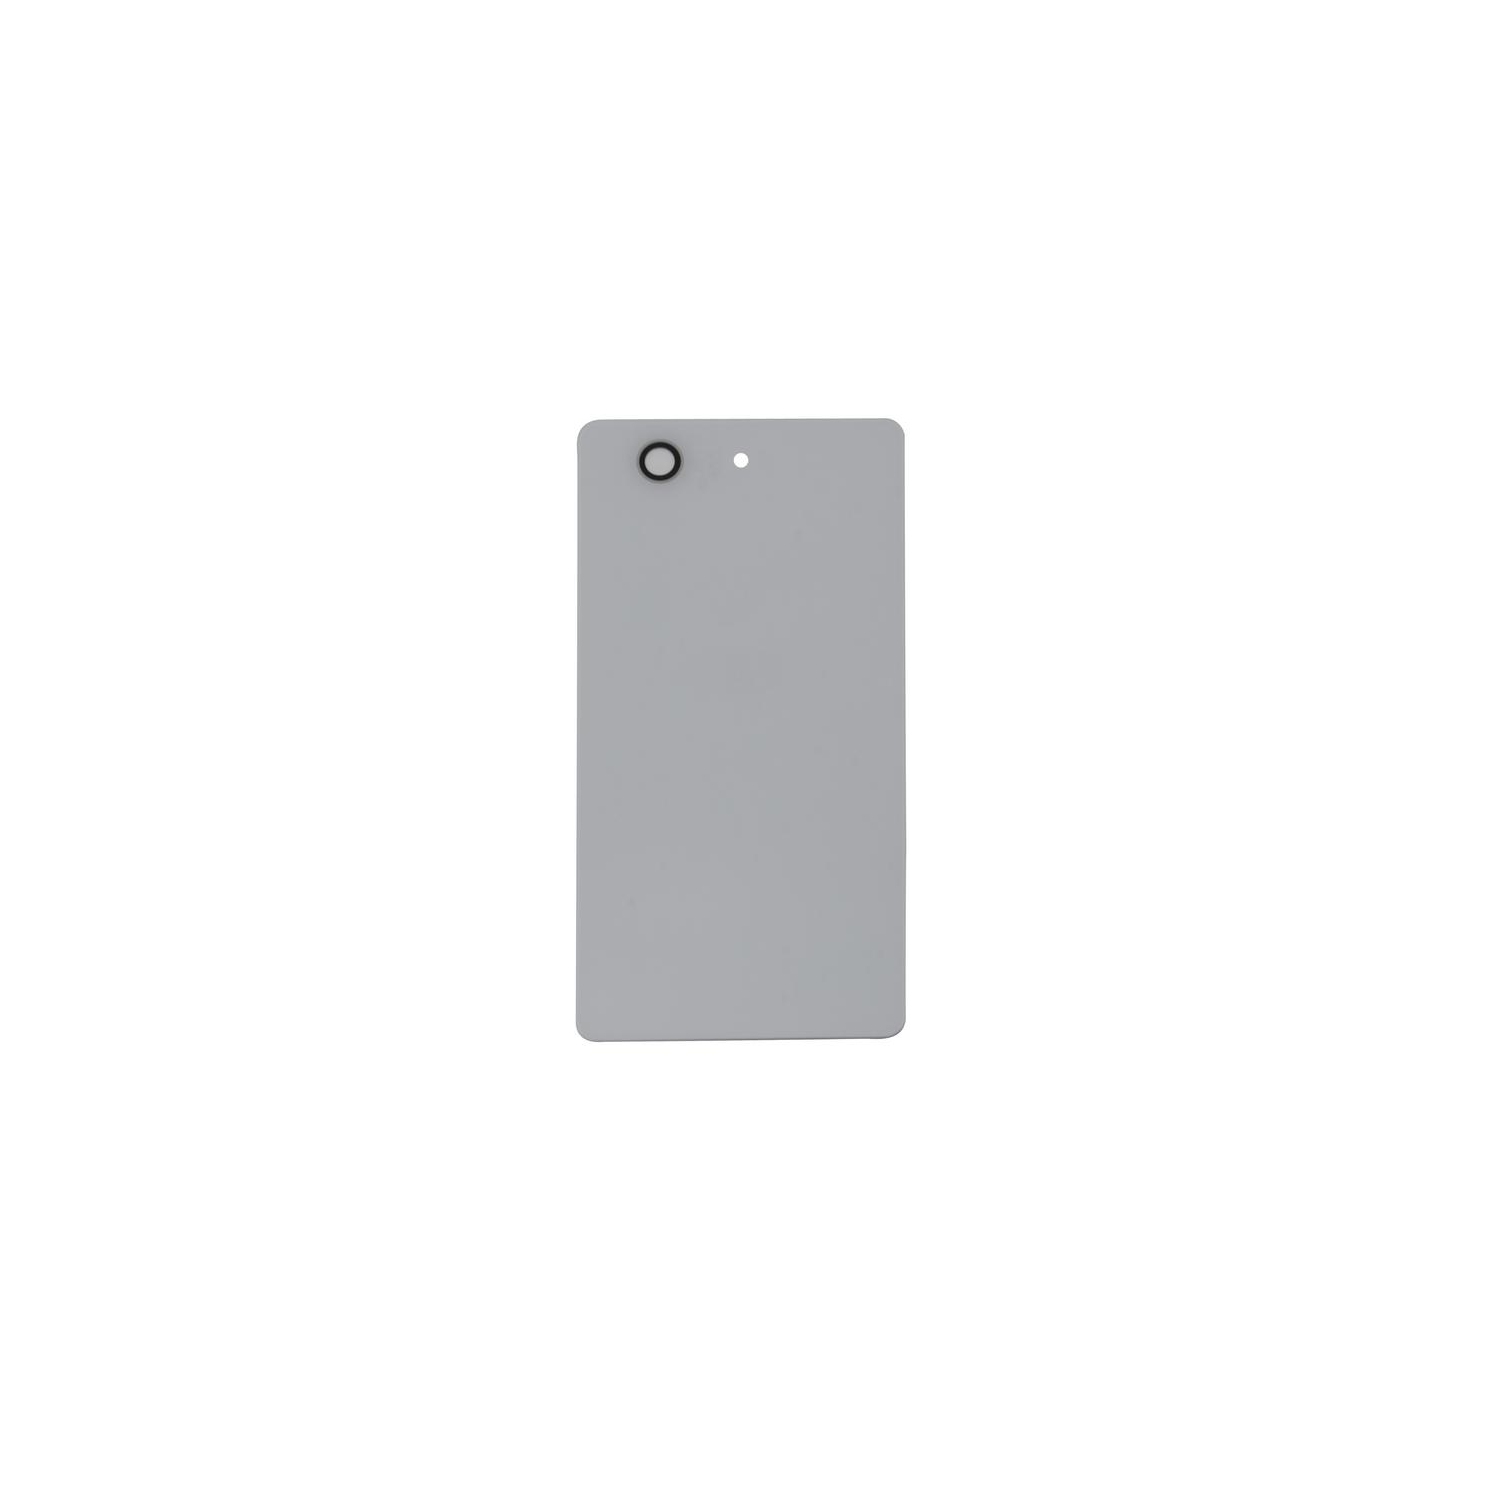 Replacement Part for Sony Xperia Z3 COMPACT Back Battery Door Housing - White